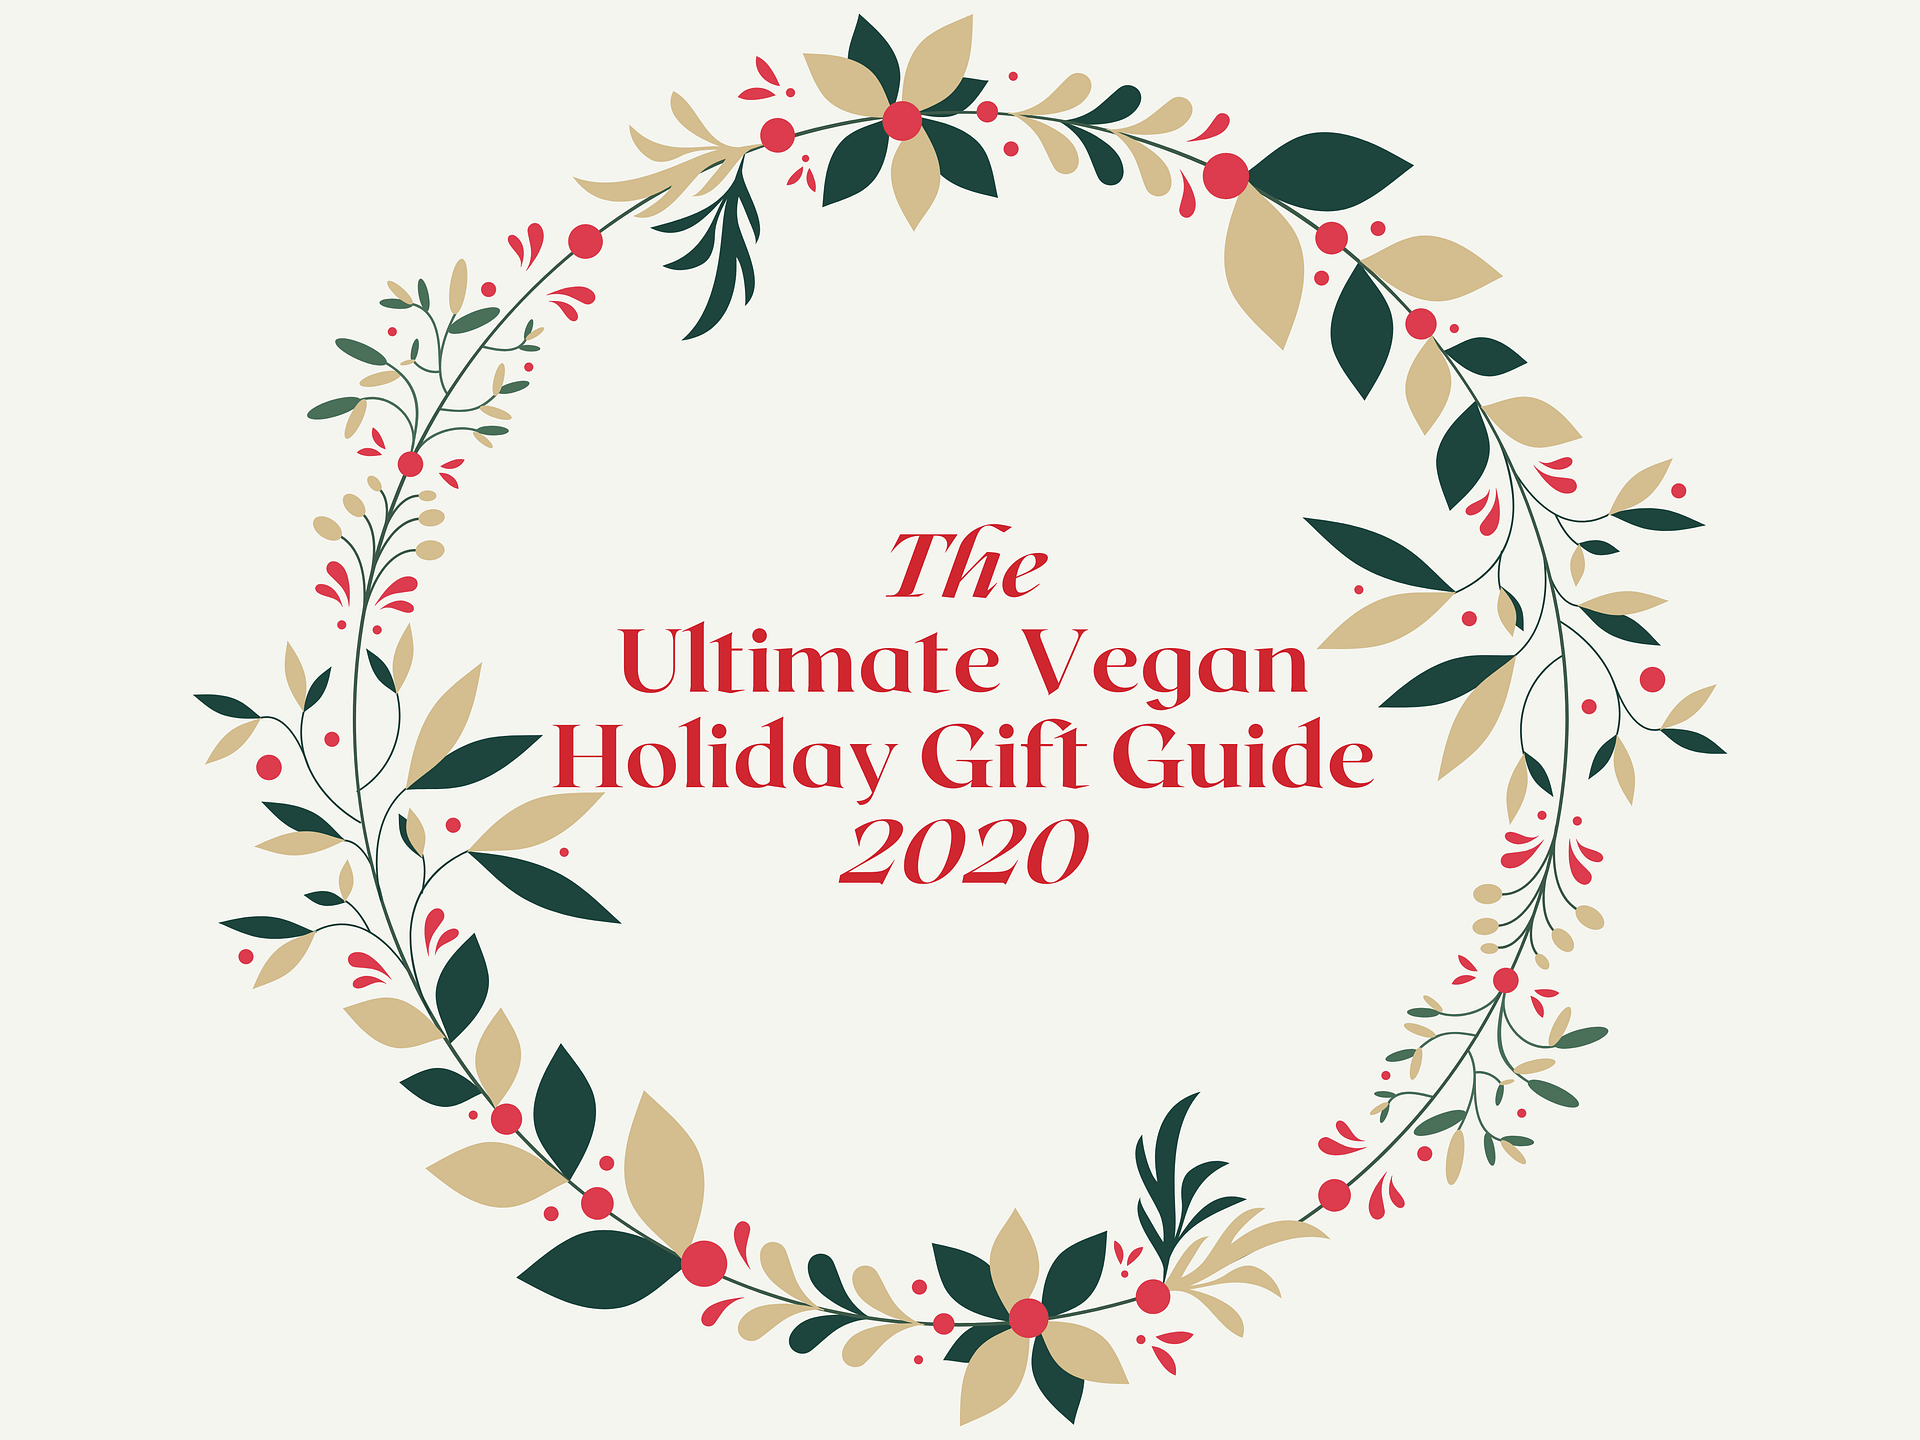 The Ultimate Vegan Holiday Gift Guide (2020) Graphic Compressed